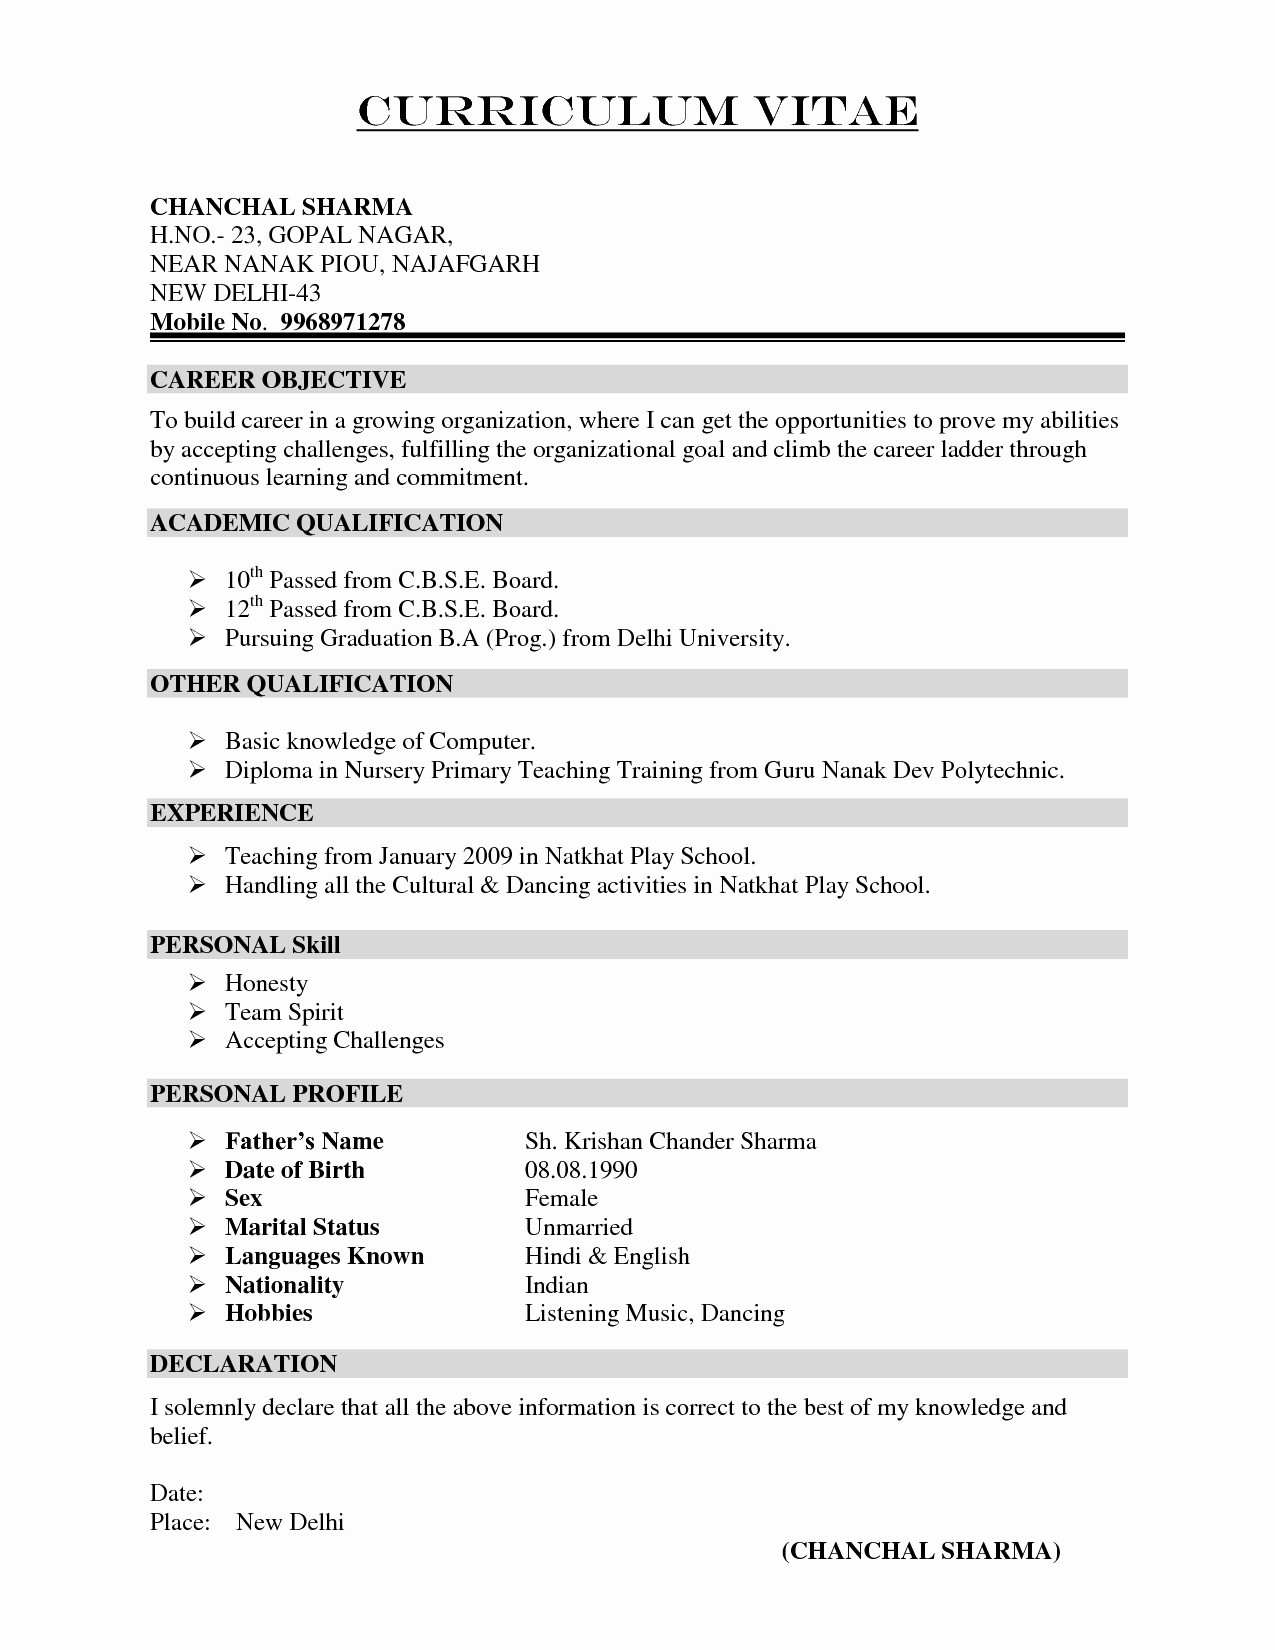 Cover Letter Template 2018 - Resumes and Cover Letters Elegant New Resume Cover Letter formatted